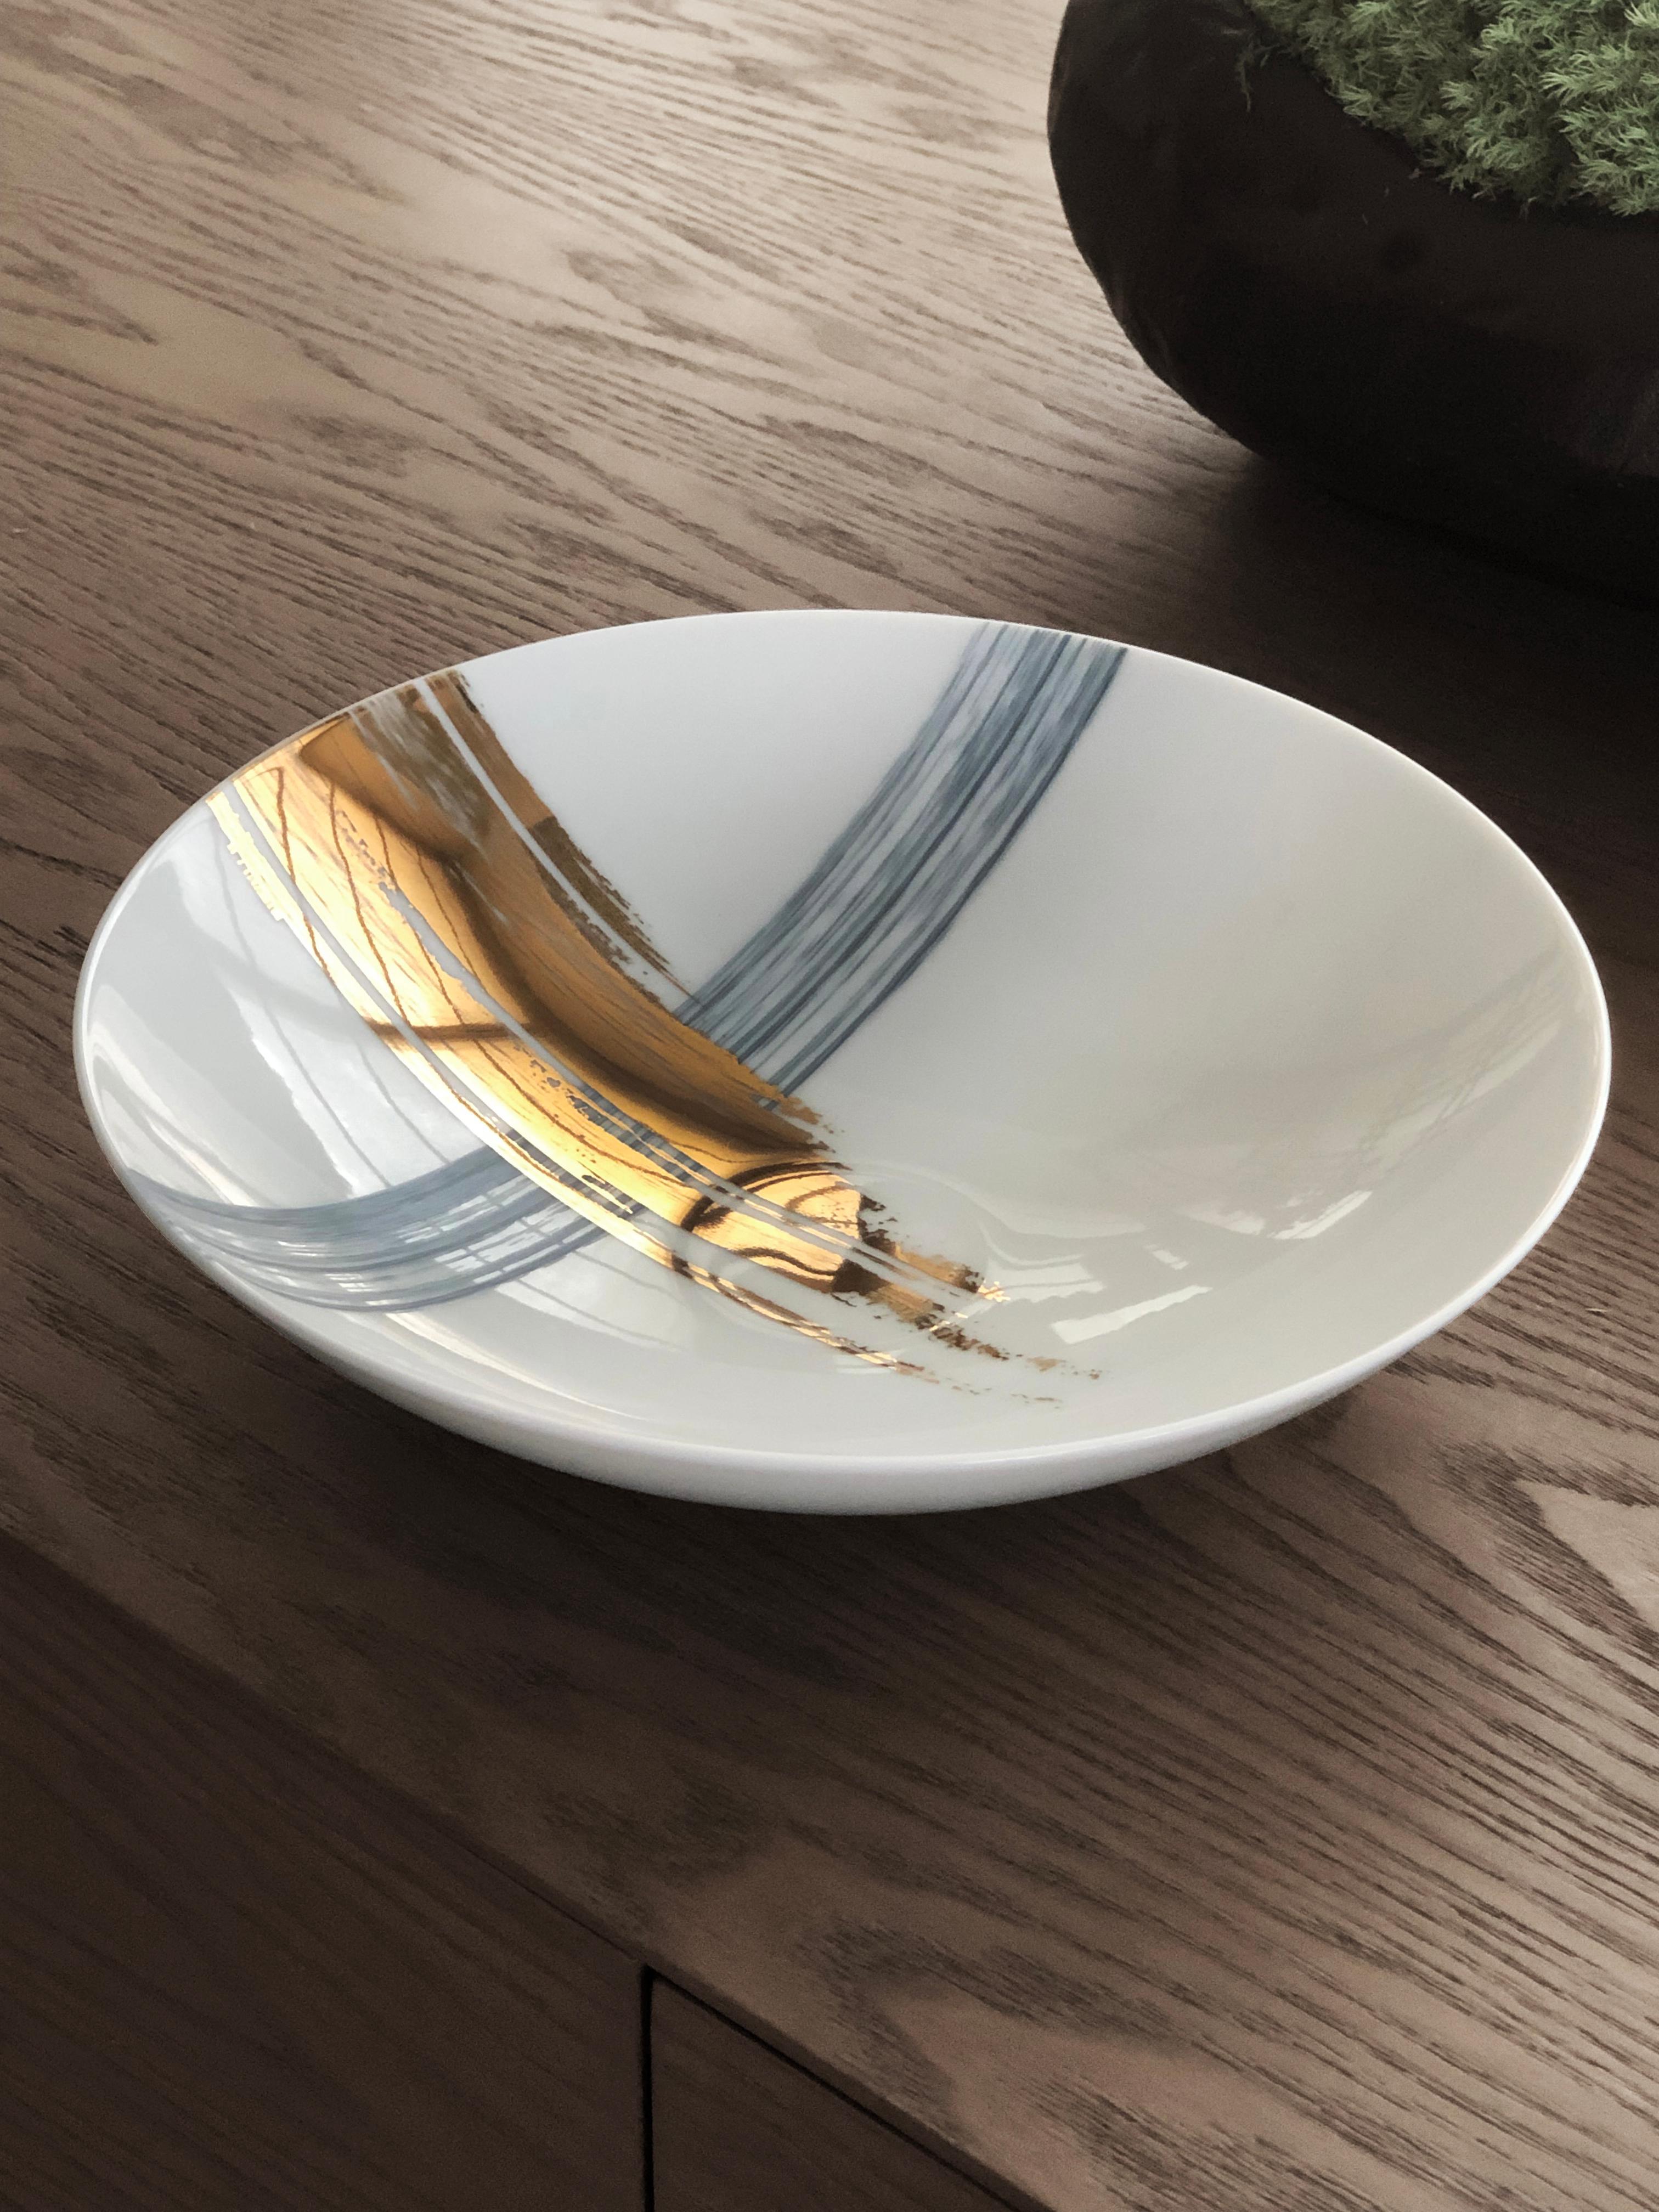 Larger quantities available upon request, with 8 weeks production time.

Description: Soup plate (2 pieces)
Color: Blue and gold
Size: 21 Ø x 5 H cm
Material: Porcelain and gold
Collection: Artisan Brush.